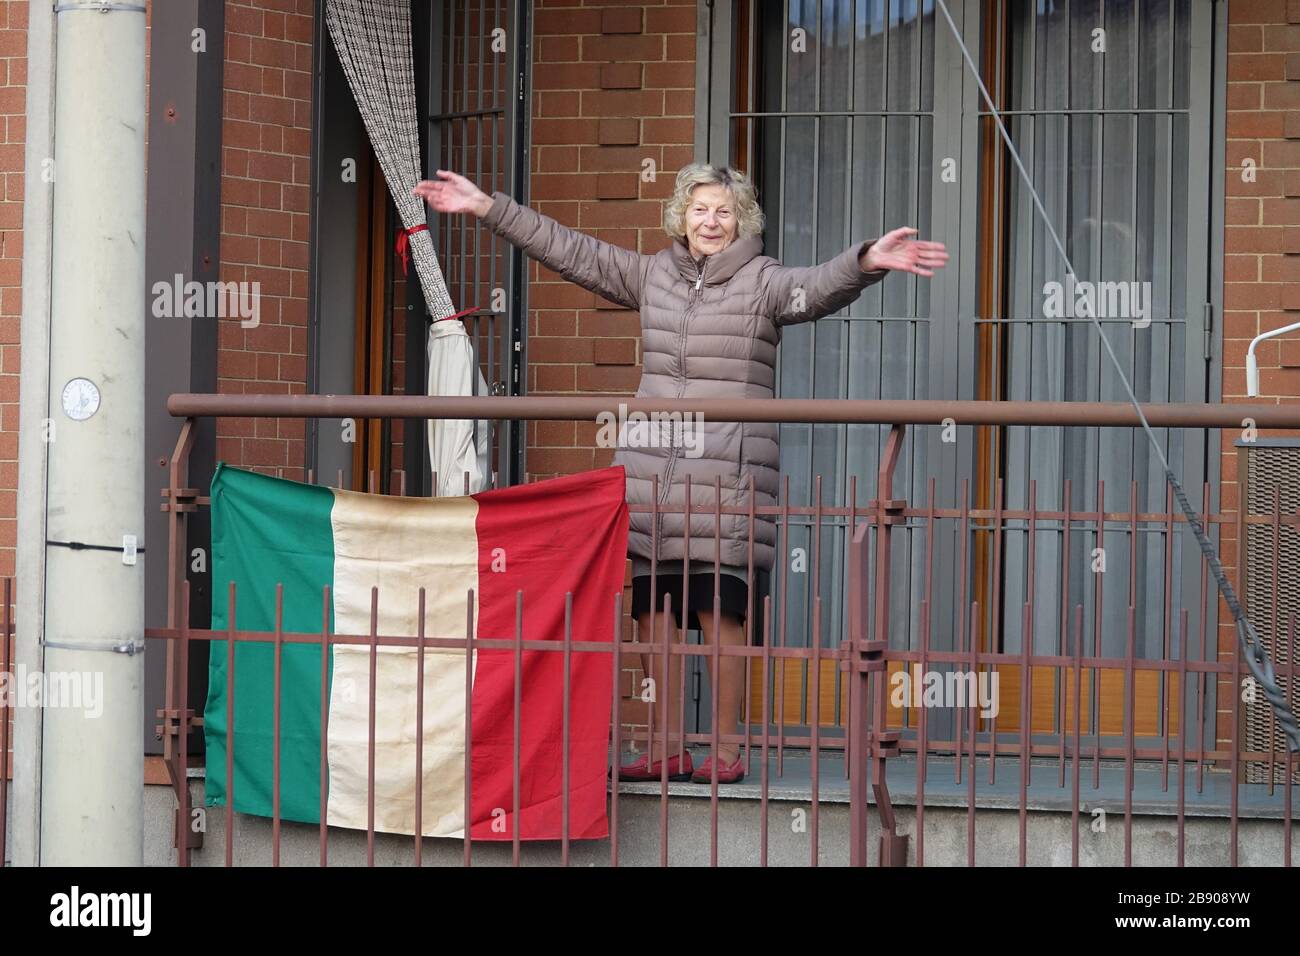 A lady in quarantine on the balcony of the house at the time of covid 19. Milan, Italy - March 2020 Stock Photo